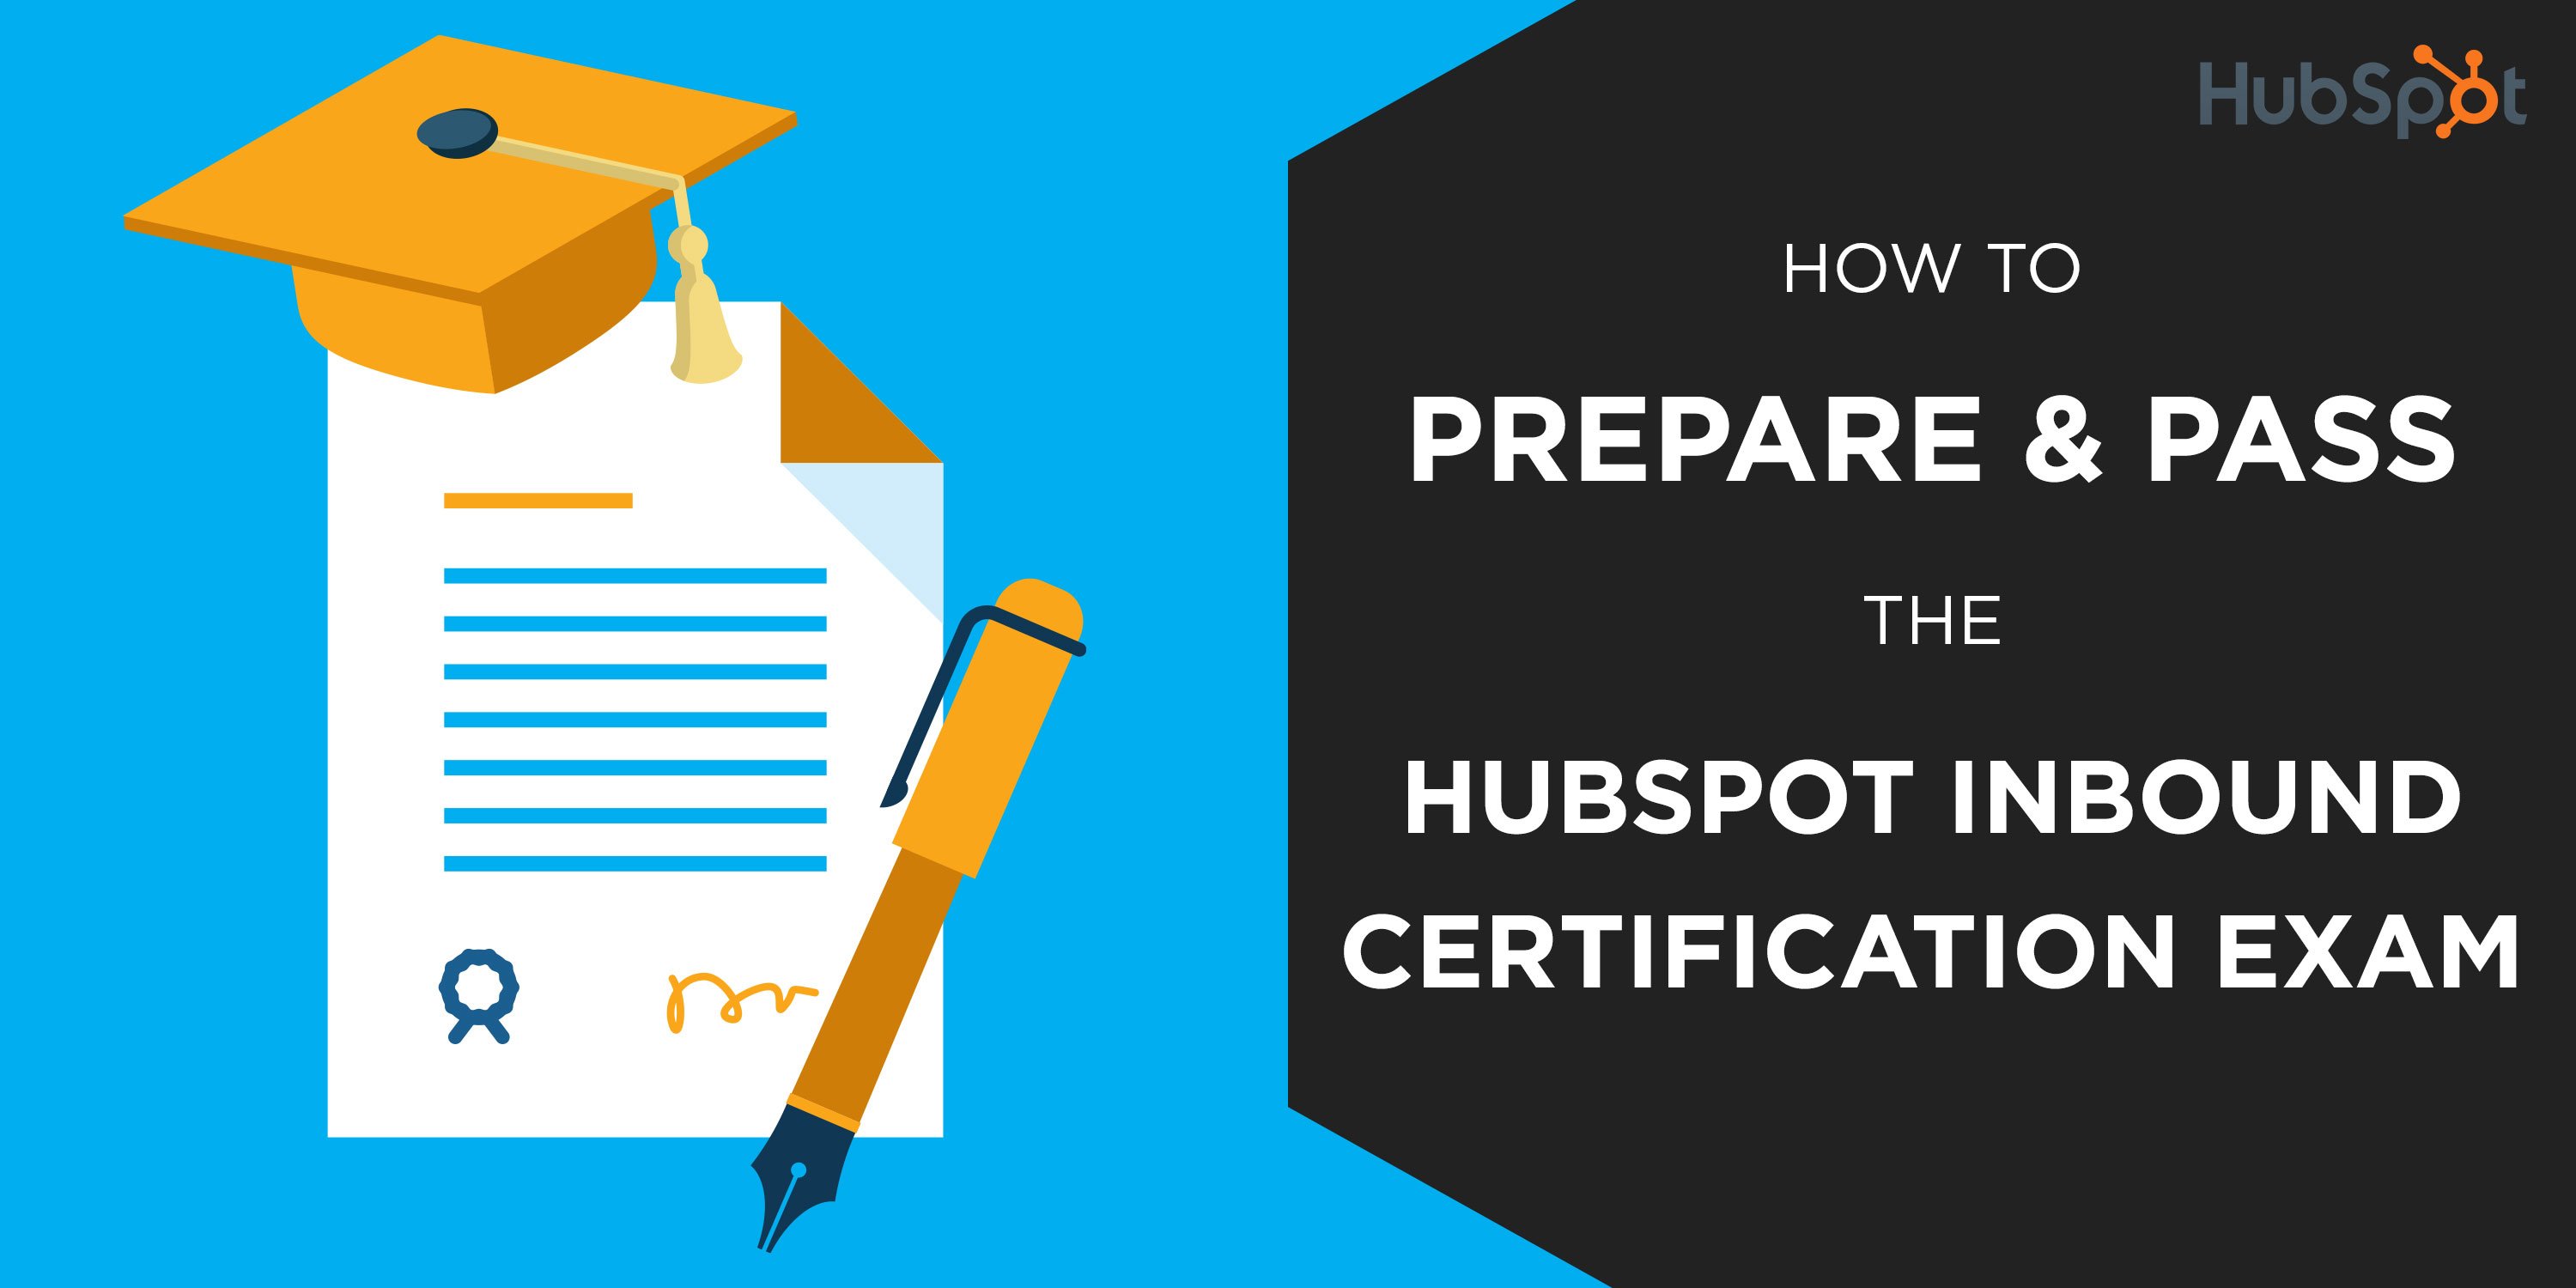 How to Prepare and Pass the HubSpot Inbound Certification Exam